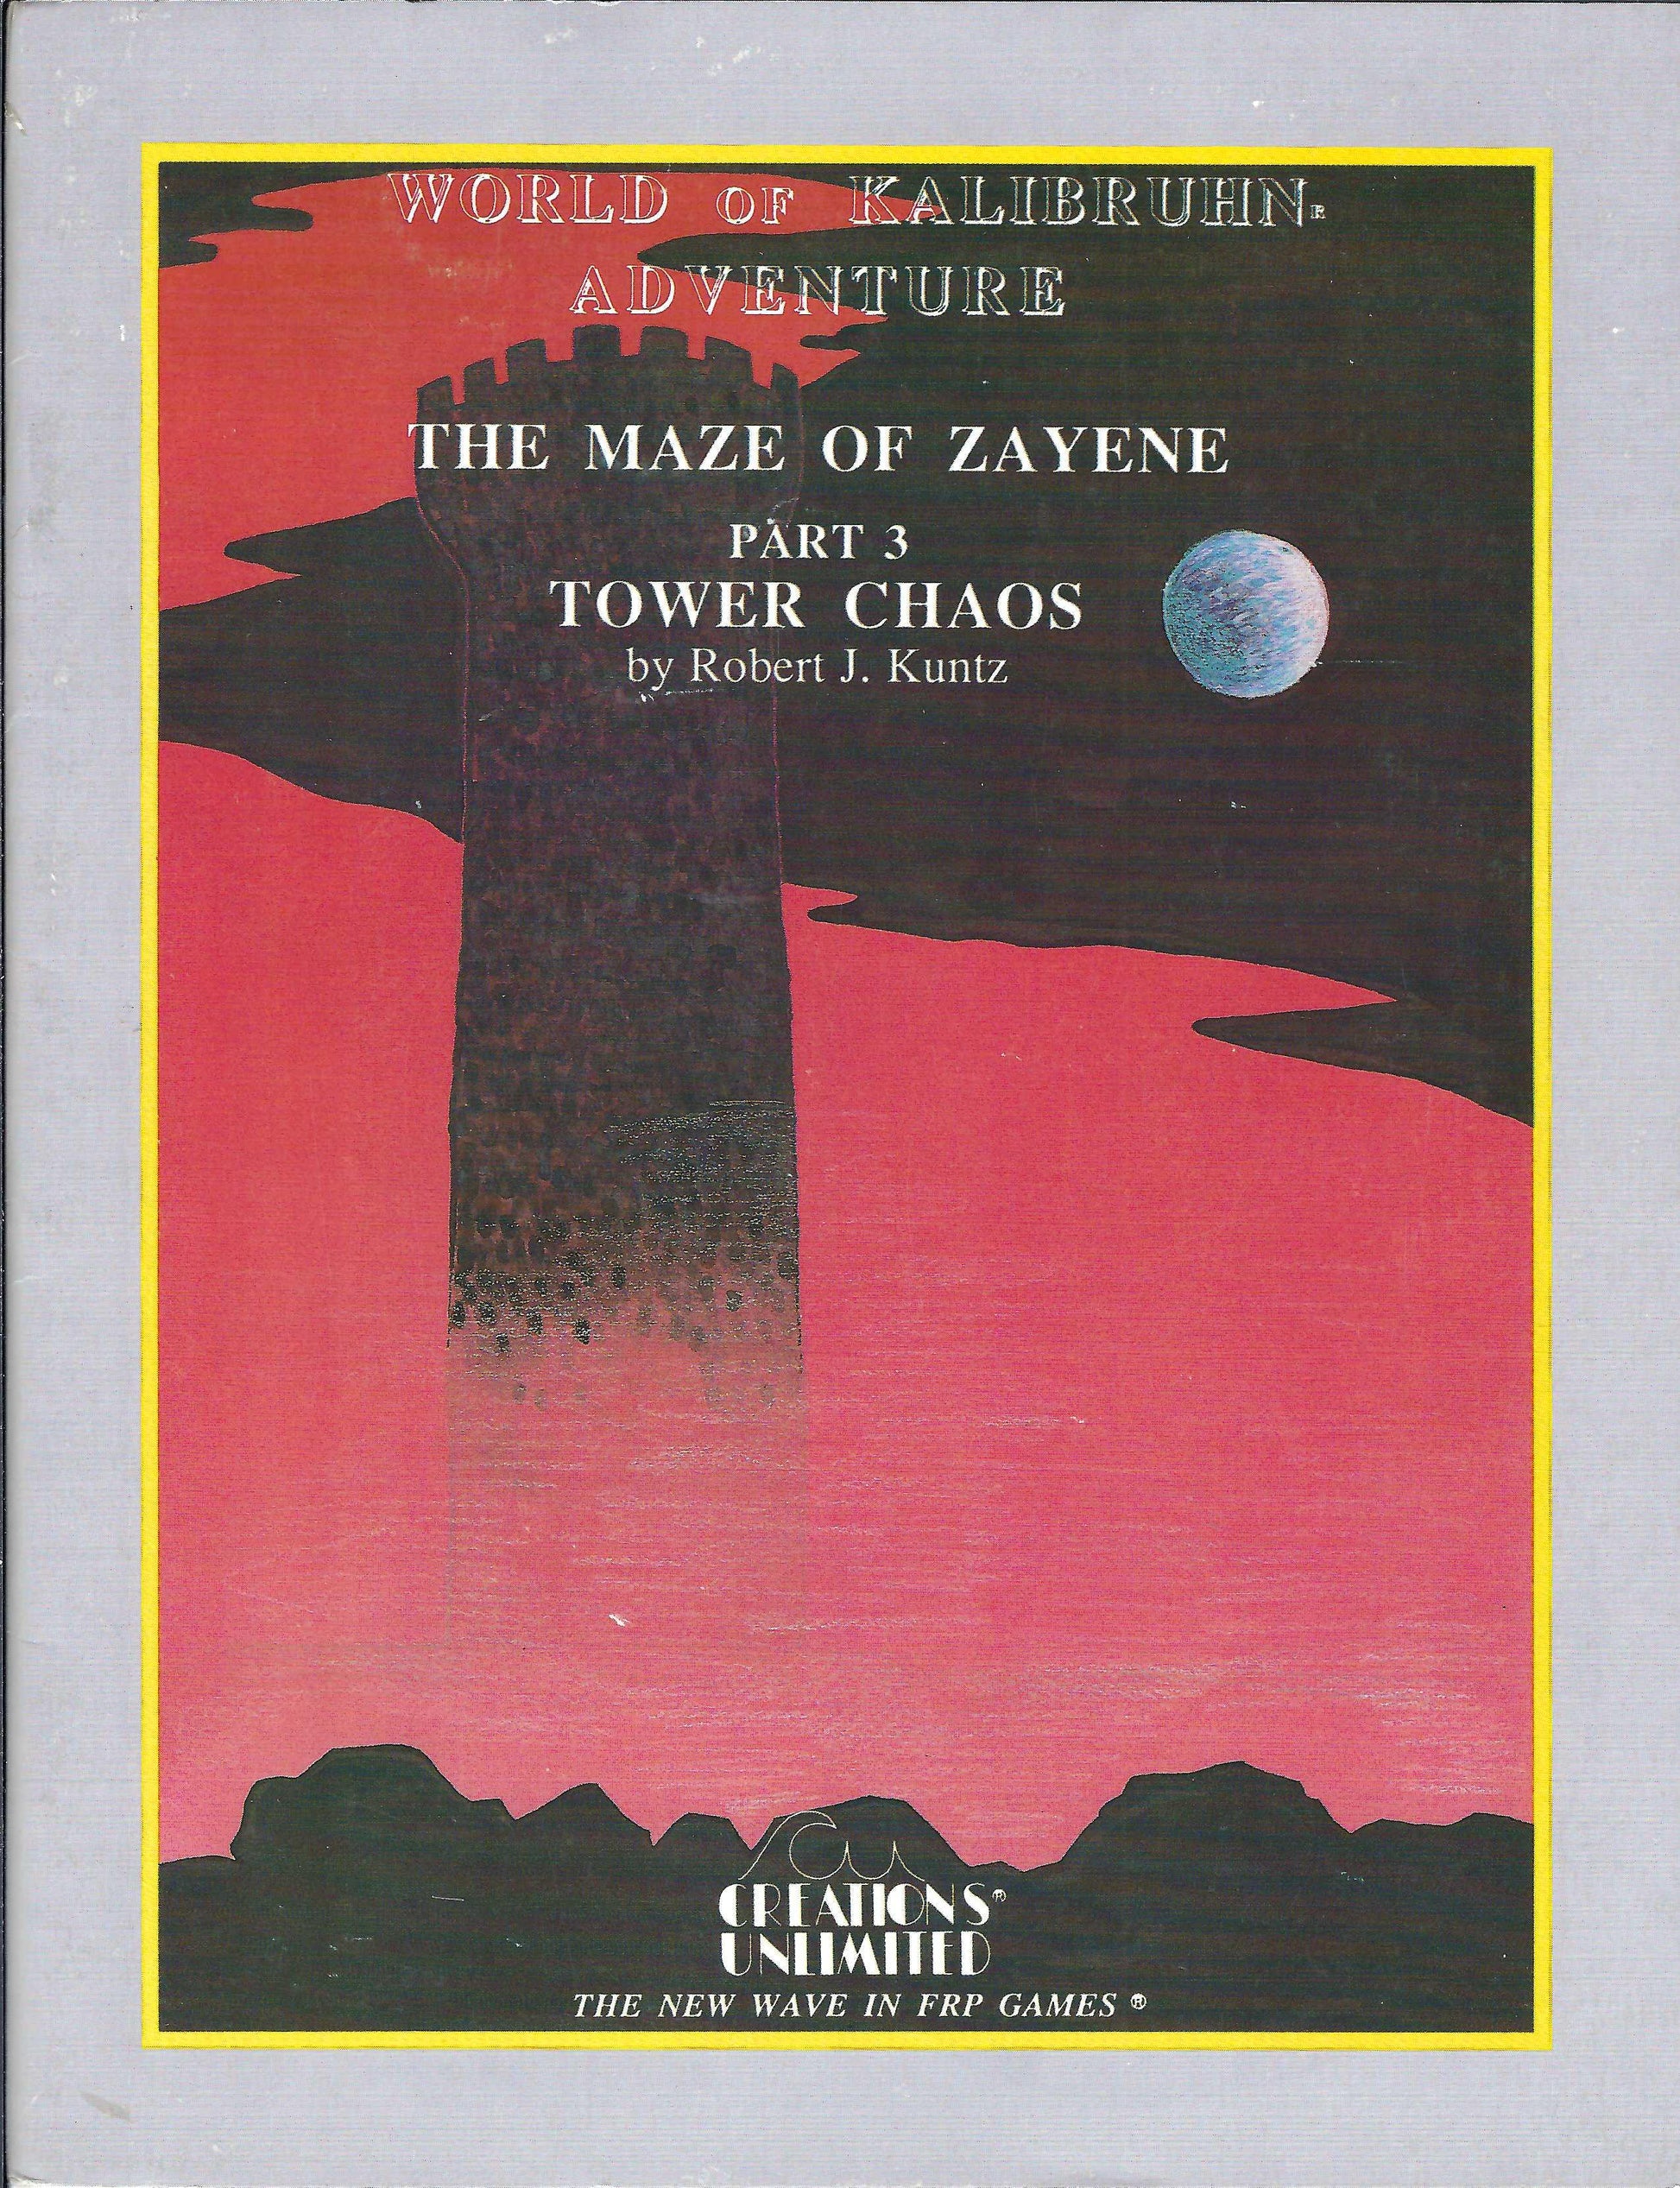 Tower Chaos (Maze of Zayne part 3) front